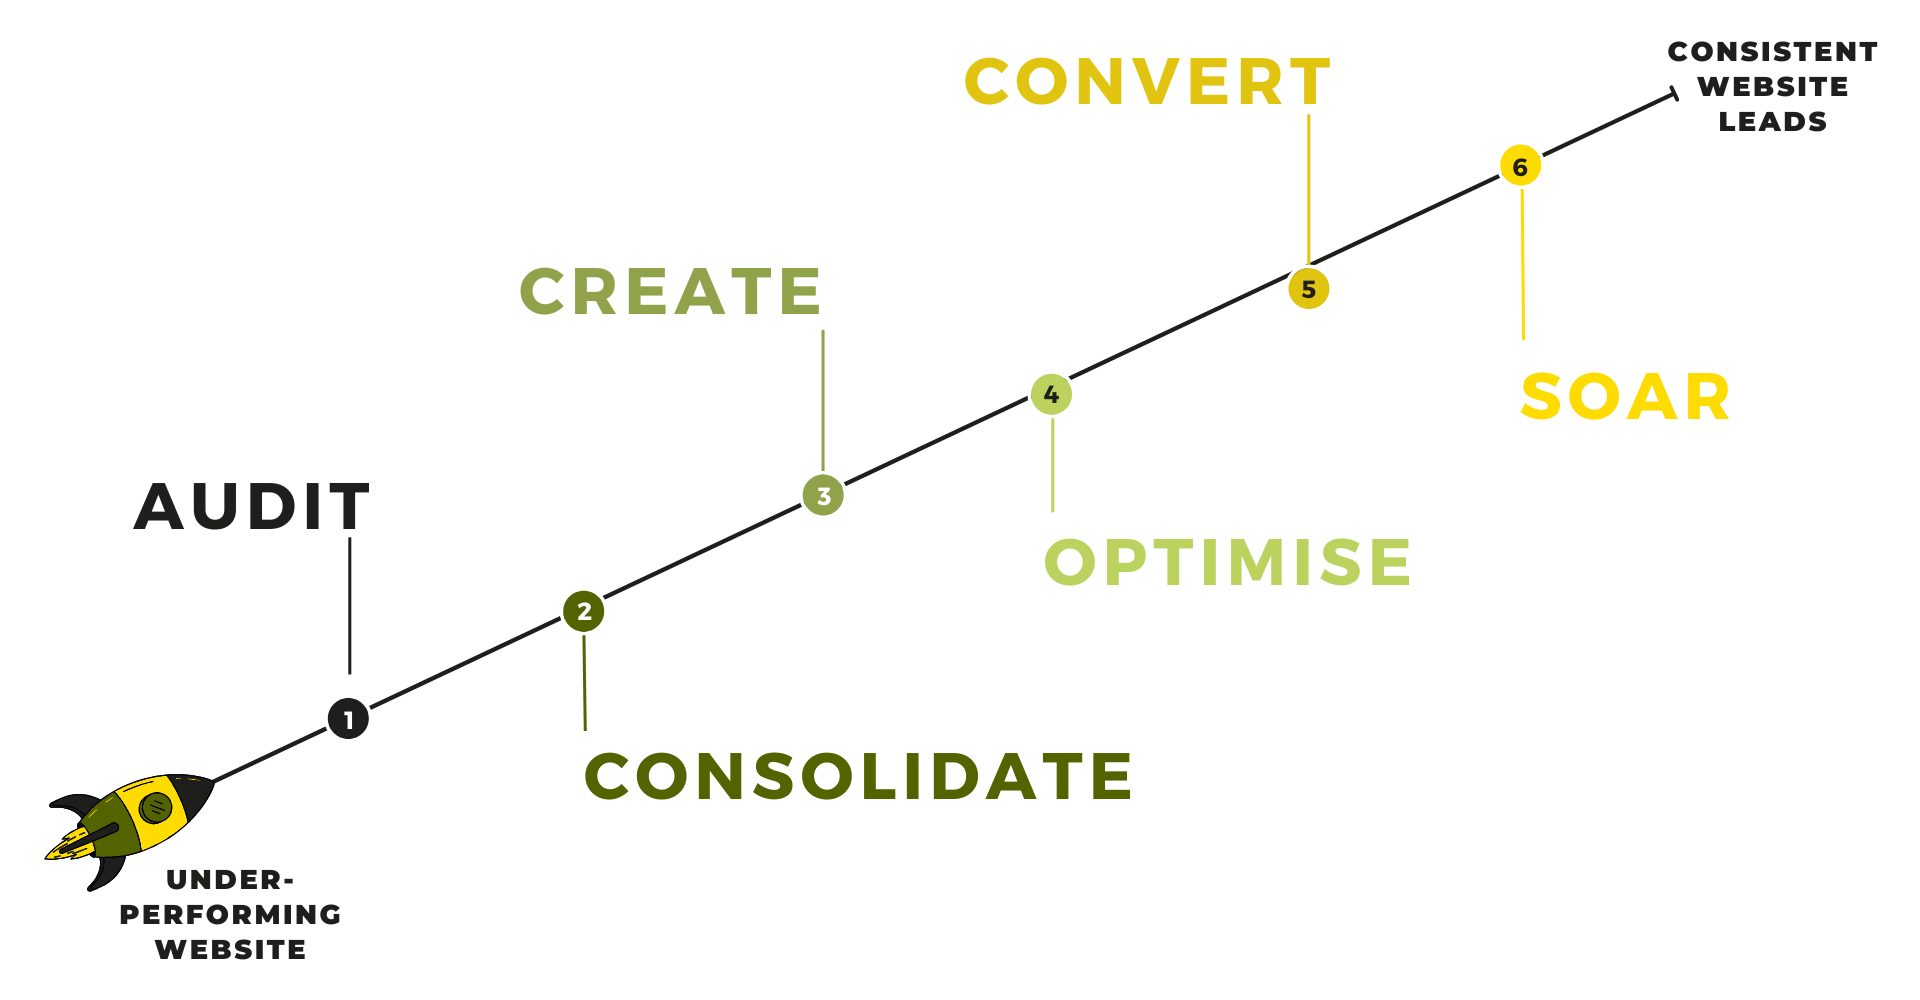 Journey to consistent website leads - simple version